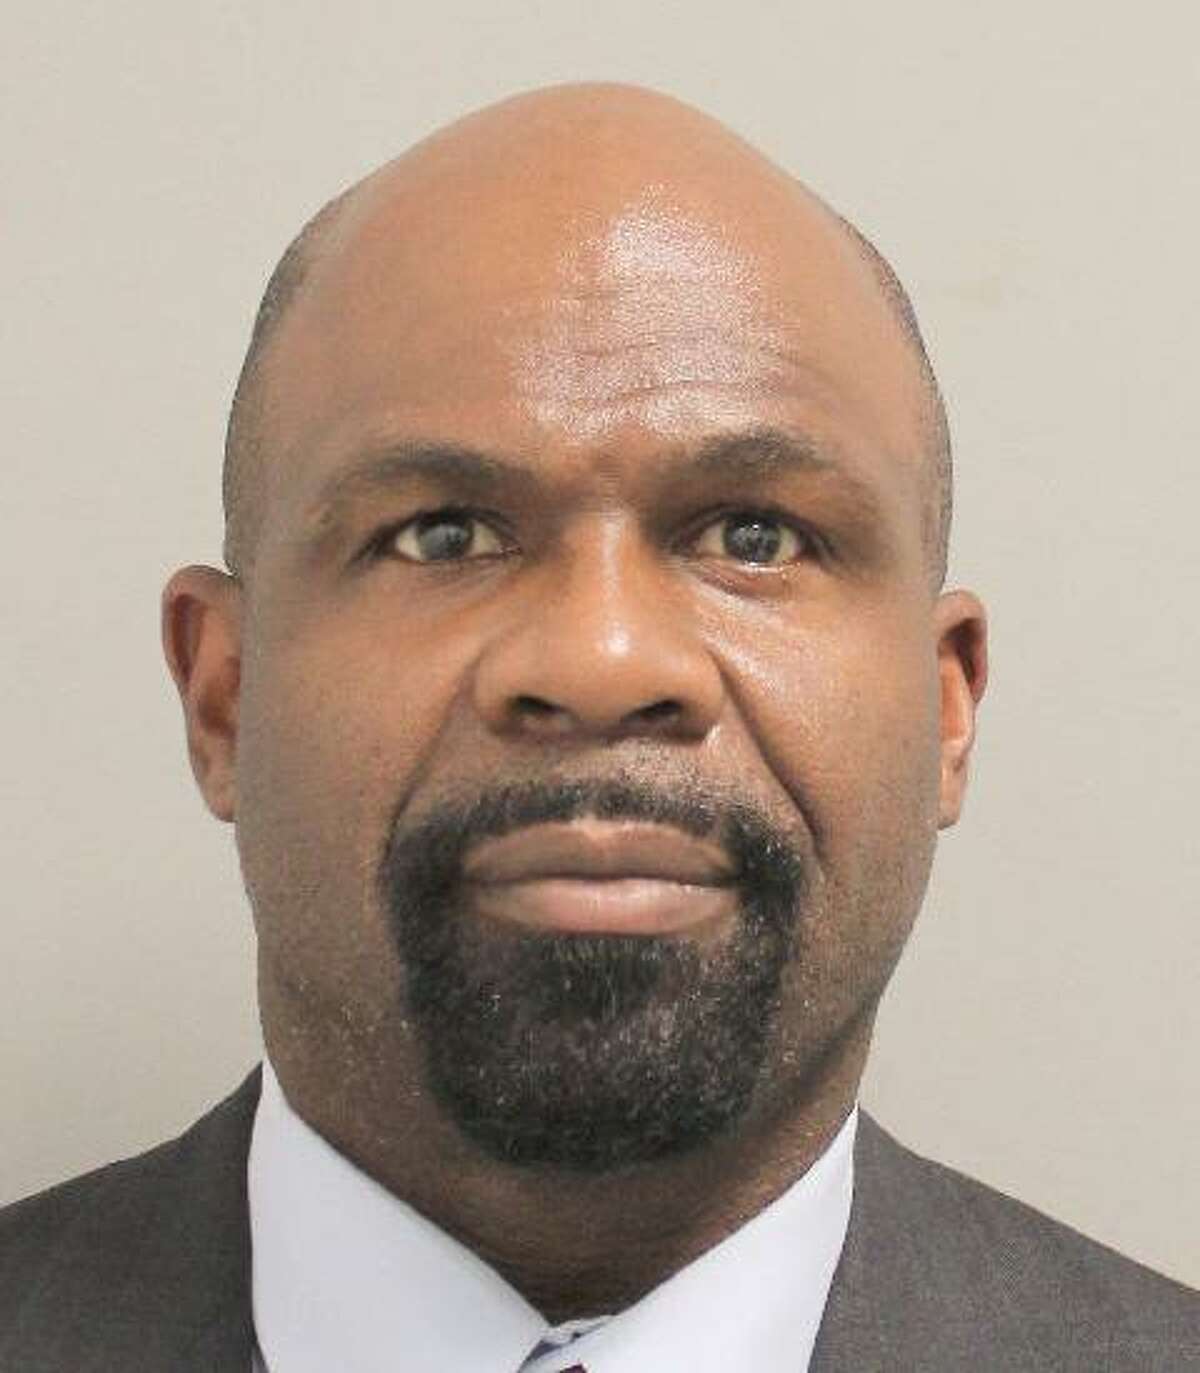 Mugshot of Hodgie Armstrong, one of four additional former Houston Police narcotics officers Kim Ogg charged with crimes stemming from an investigation into the deadly 2019 drug raid at 7815 Harding street that killed two homeowners.